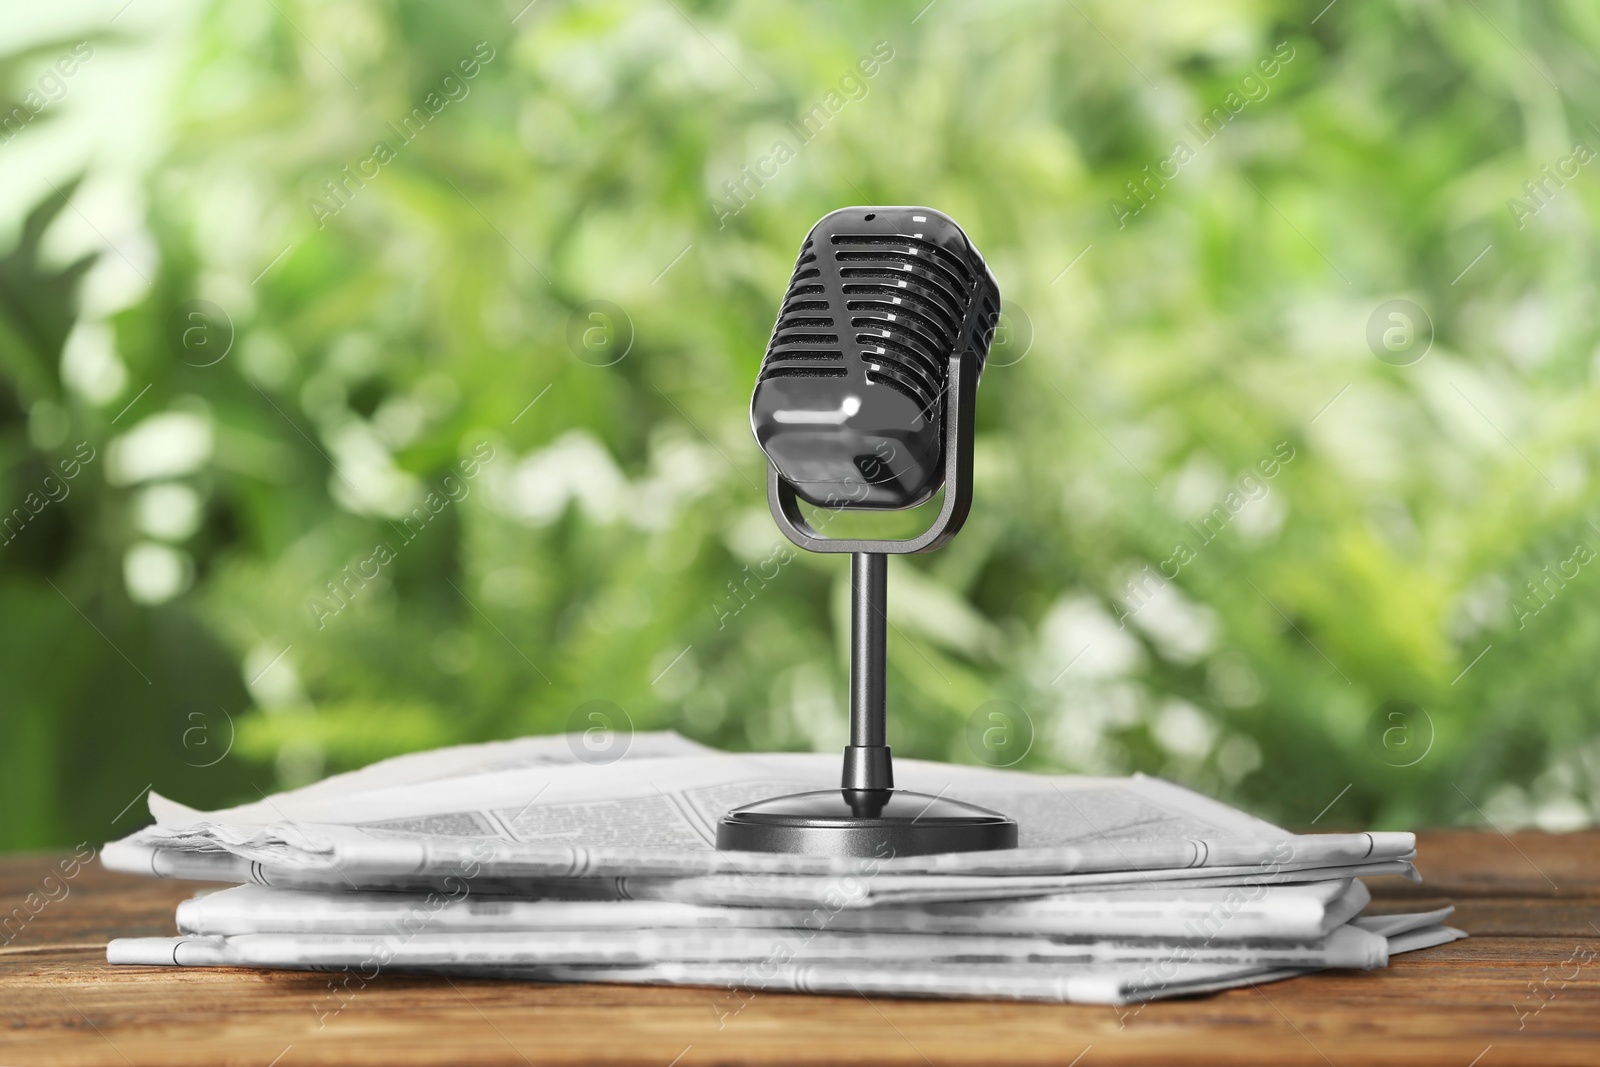 Photo of Newspapers and vintage microphone on wooden table against blurred green background. Journalist's work